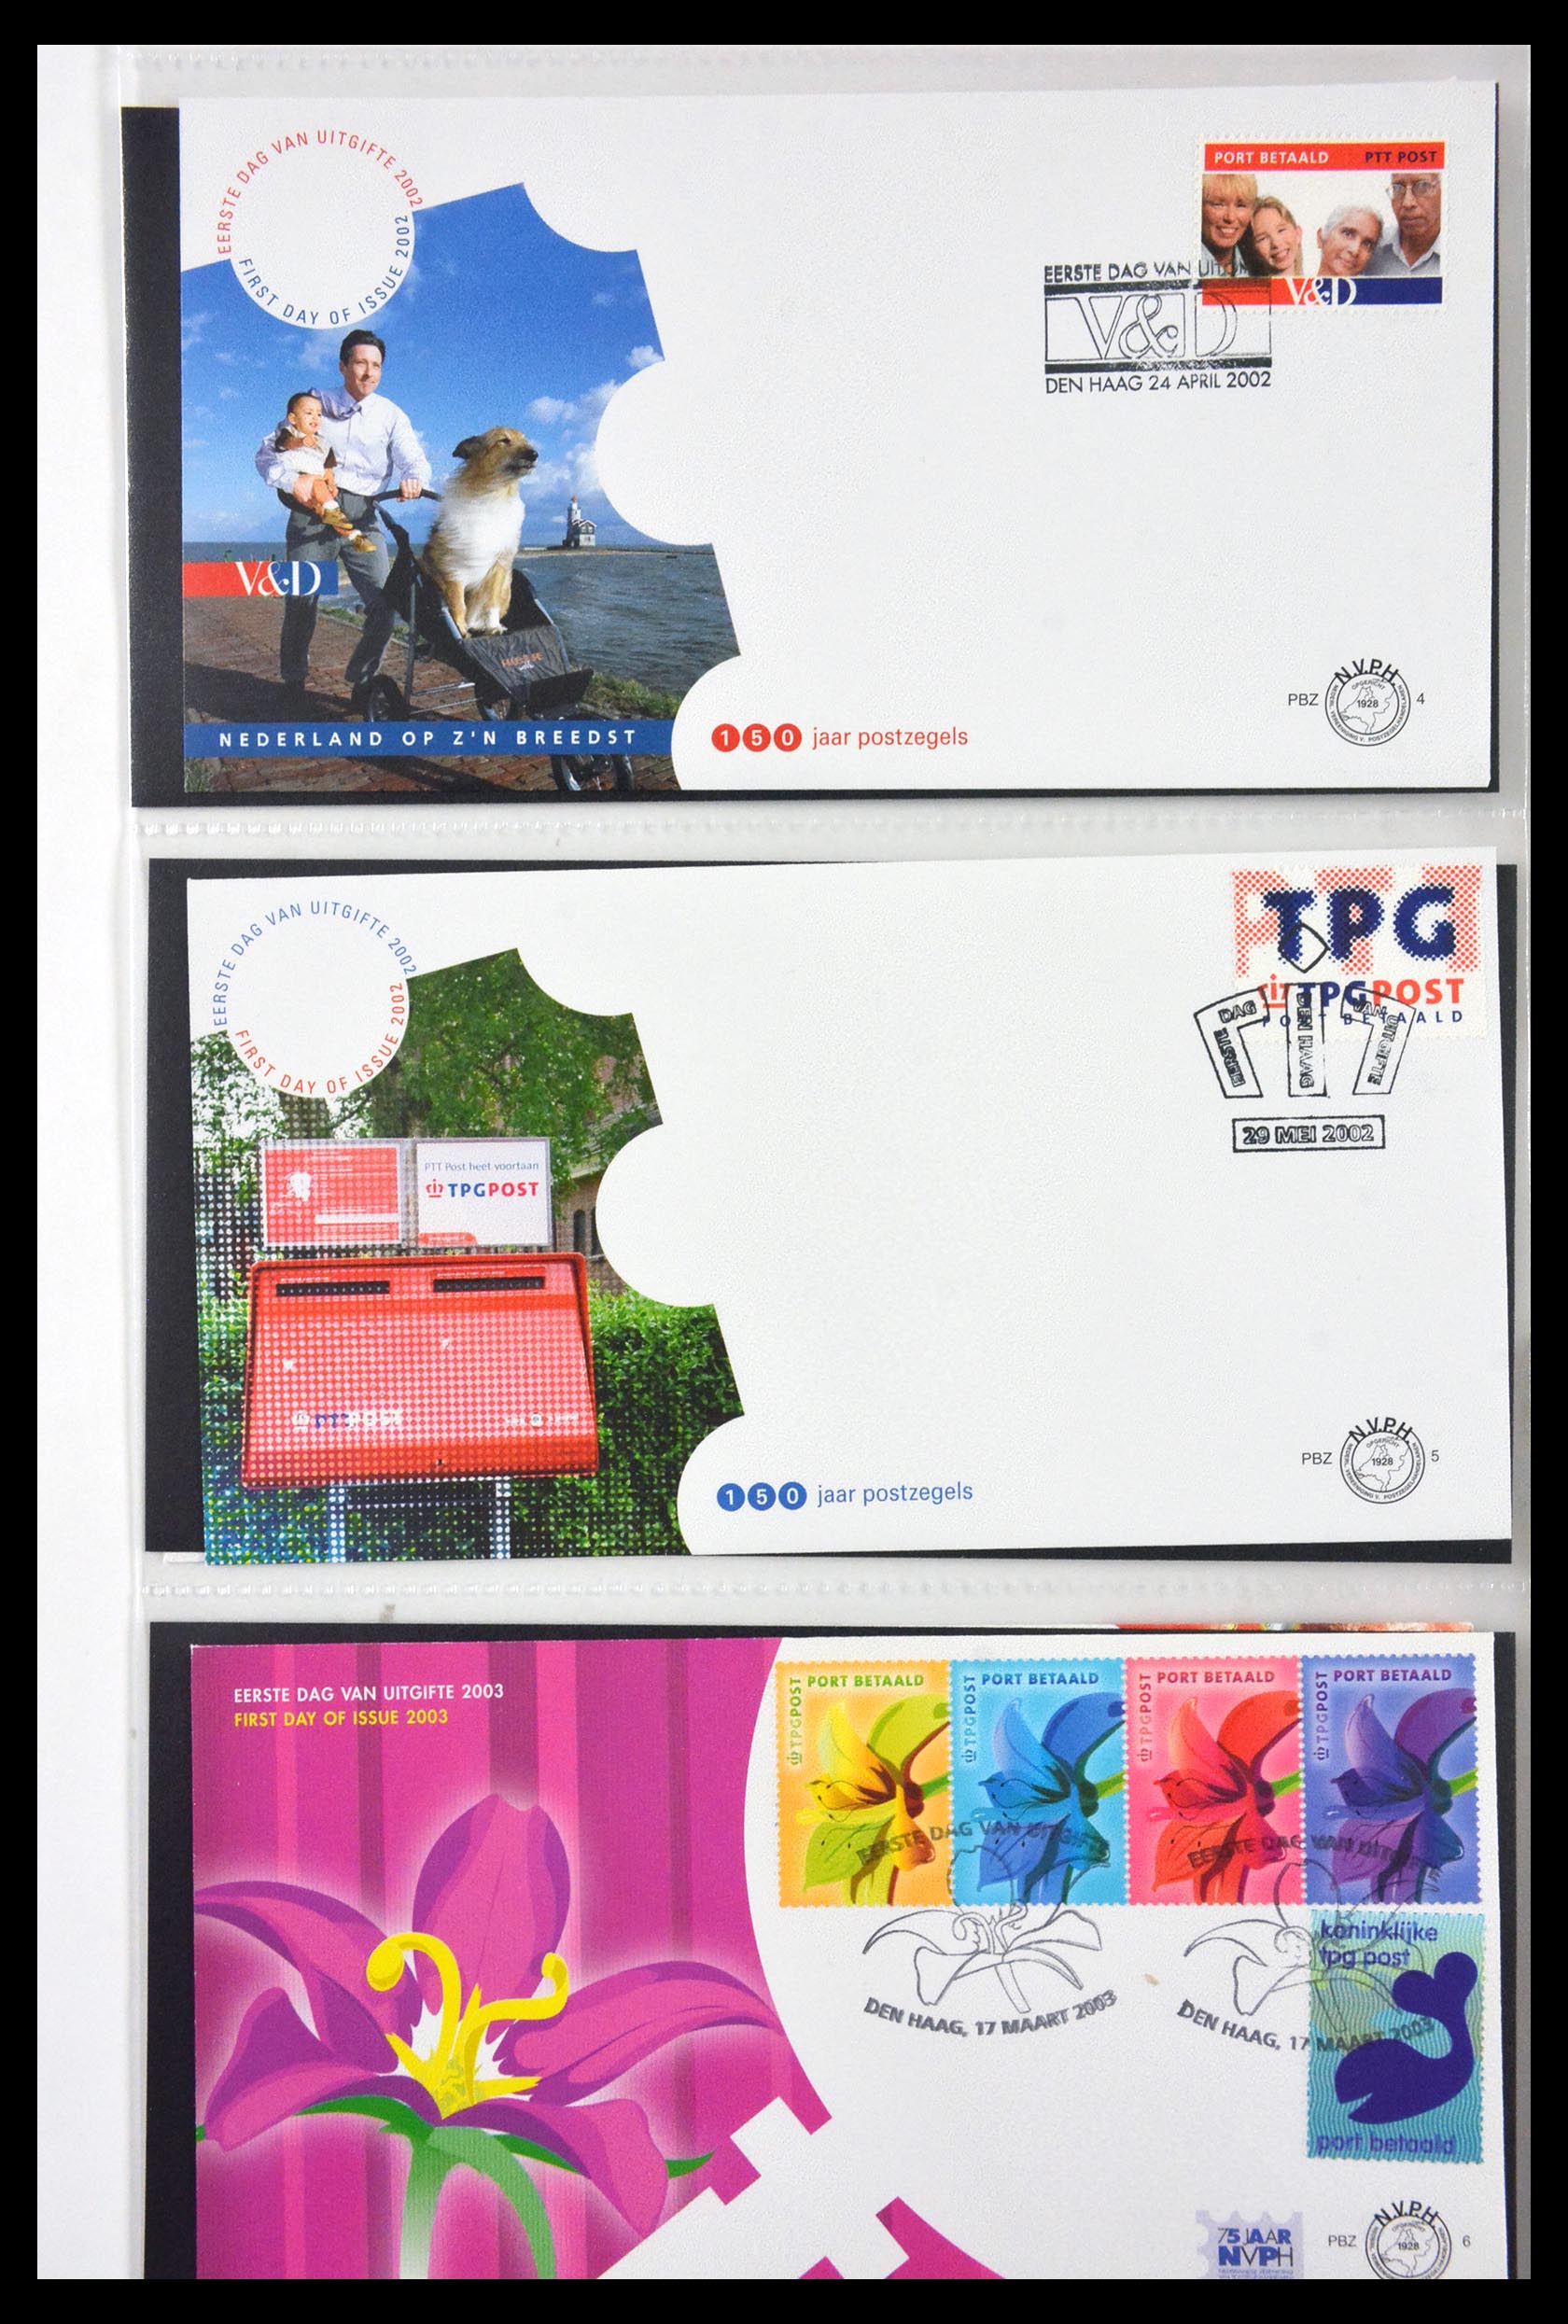 29666 125 - 29666 Netherlands 1997-2011 FDC's.